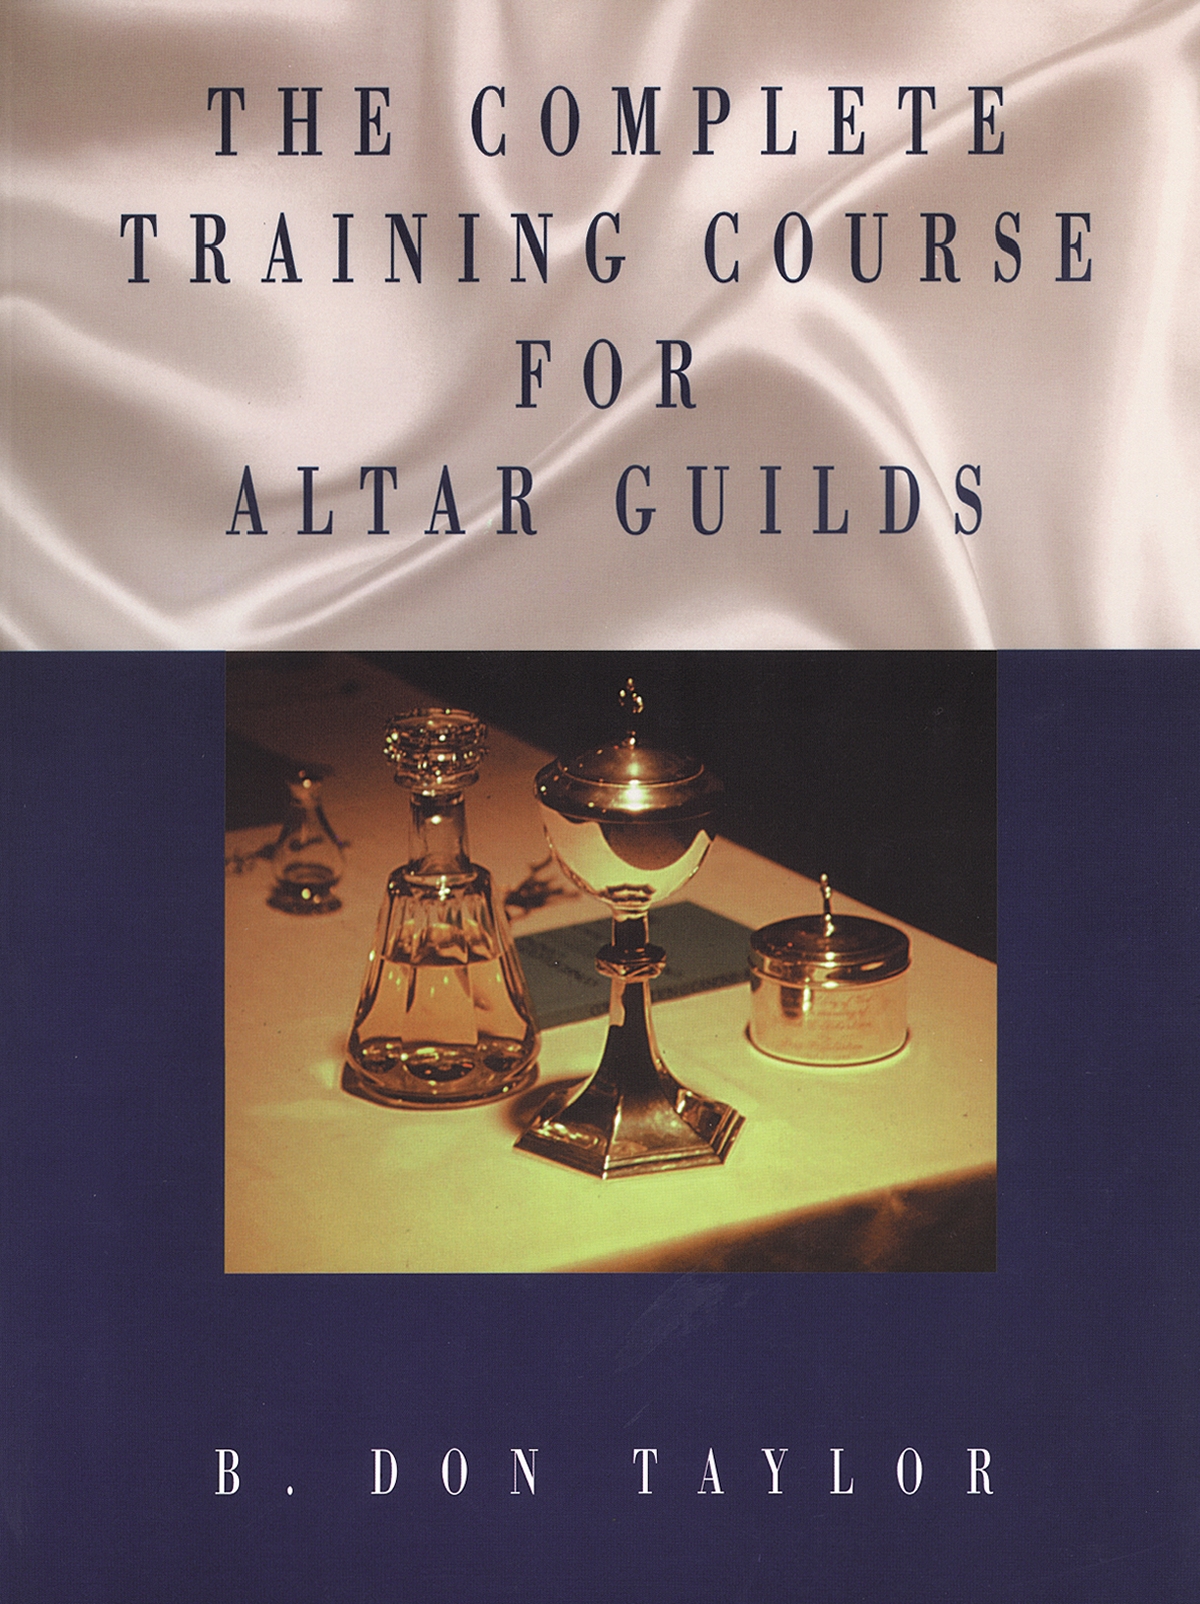 ChurchPublishing.org: The Complete Training Course for Altar Guilds